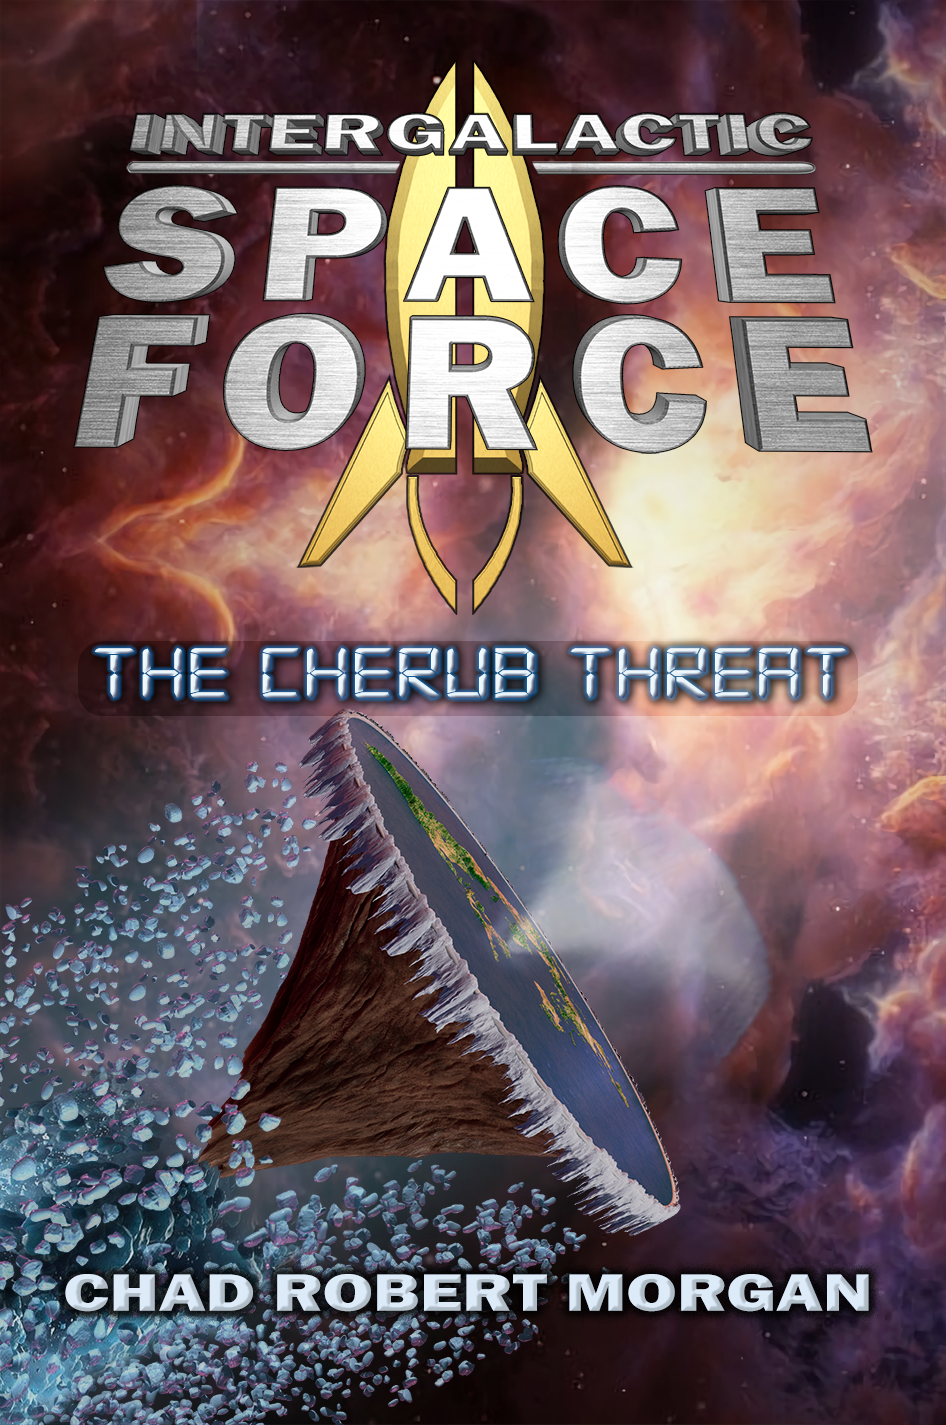 The second book in the series, Intergalactic Space Force : The Cherub Threat